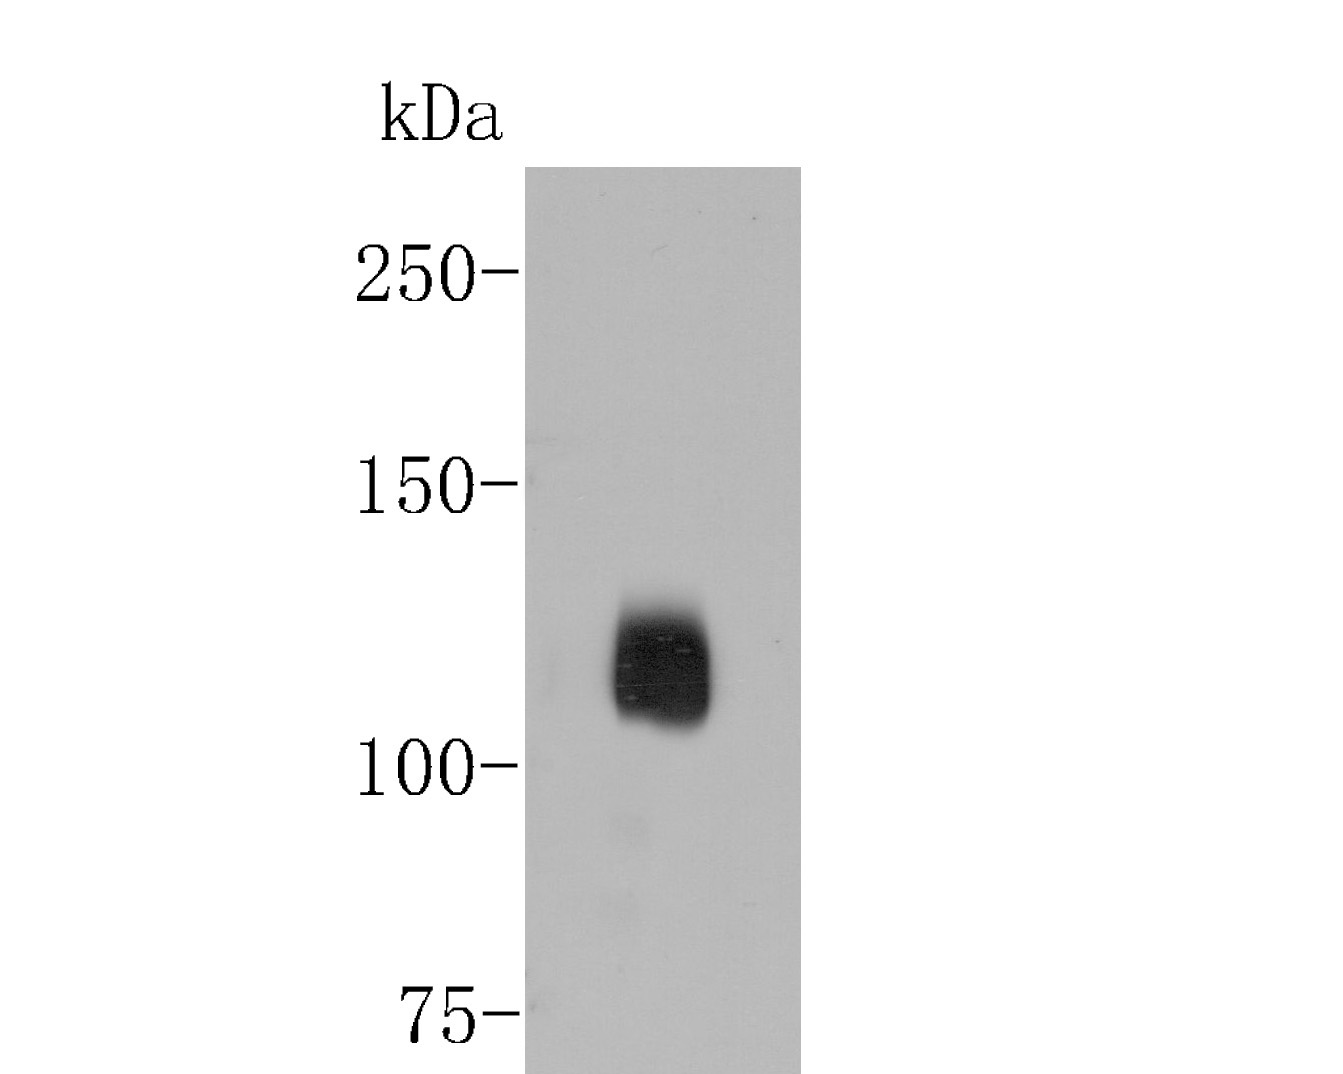 Western blot analysis of Metabotropic glutamate receptor 5 on PC-12 cell lysates. Proteins were transferred to a PVDF membrane and blocked with 5% BSA in PBS for 1 hour at room temperature. The primary antibody (ET1609-36, 1/500) was used in 5% BSA at room temperature for 2 hours. Goat Anti-Rabbit IgG - HRP Secondary Antibody (HA1001) at 1:5,000 dilution was used for 1 hour at room temperature.